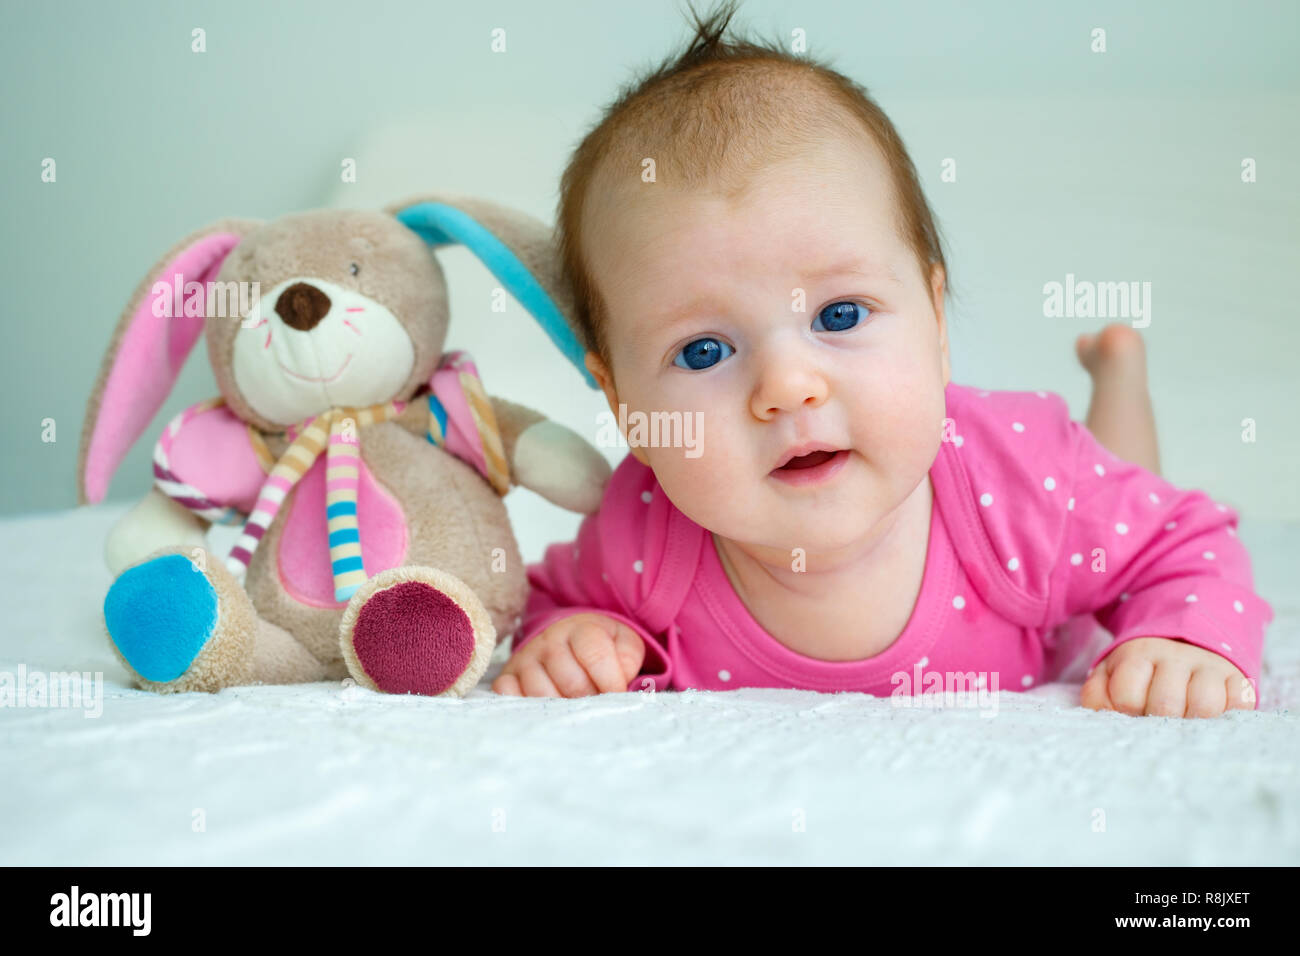 Portrait of a cute newborn baby girl lying on her stomach Stock Photo